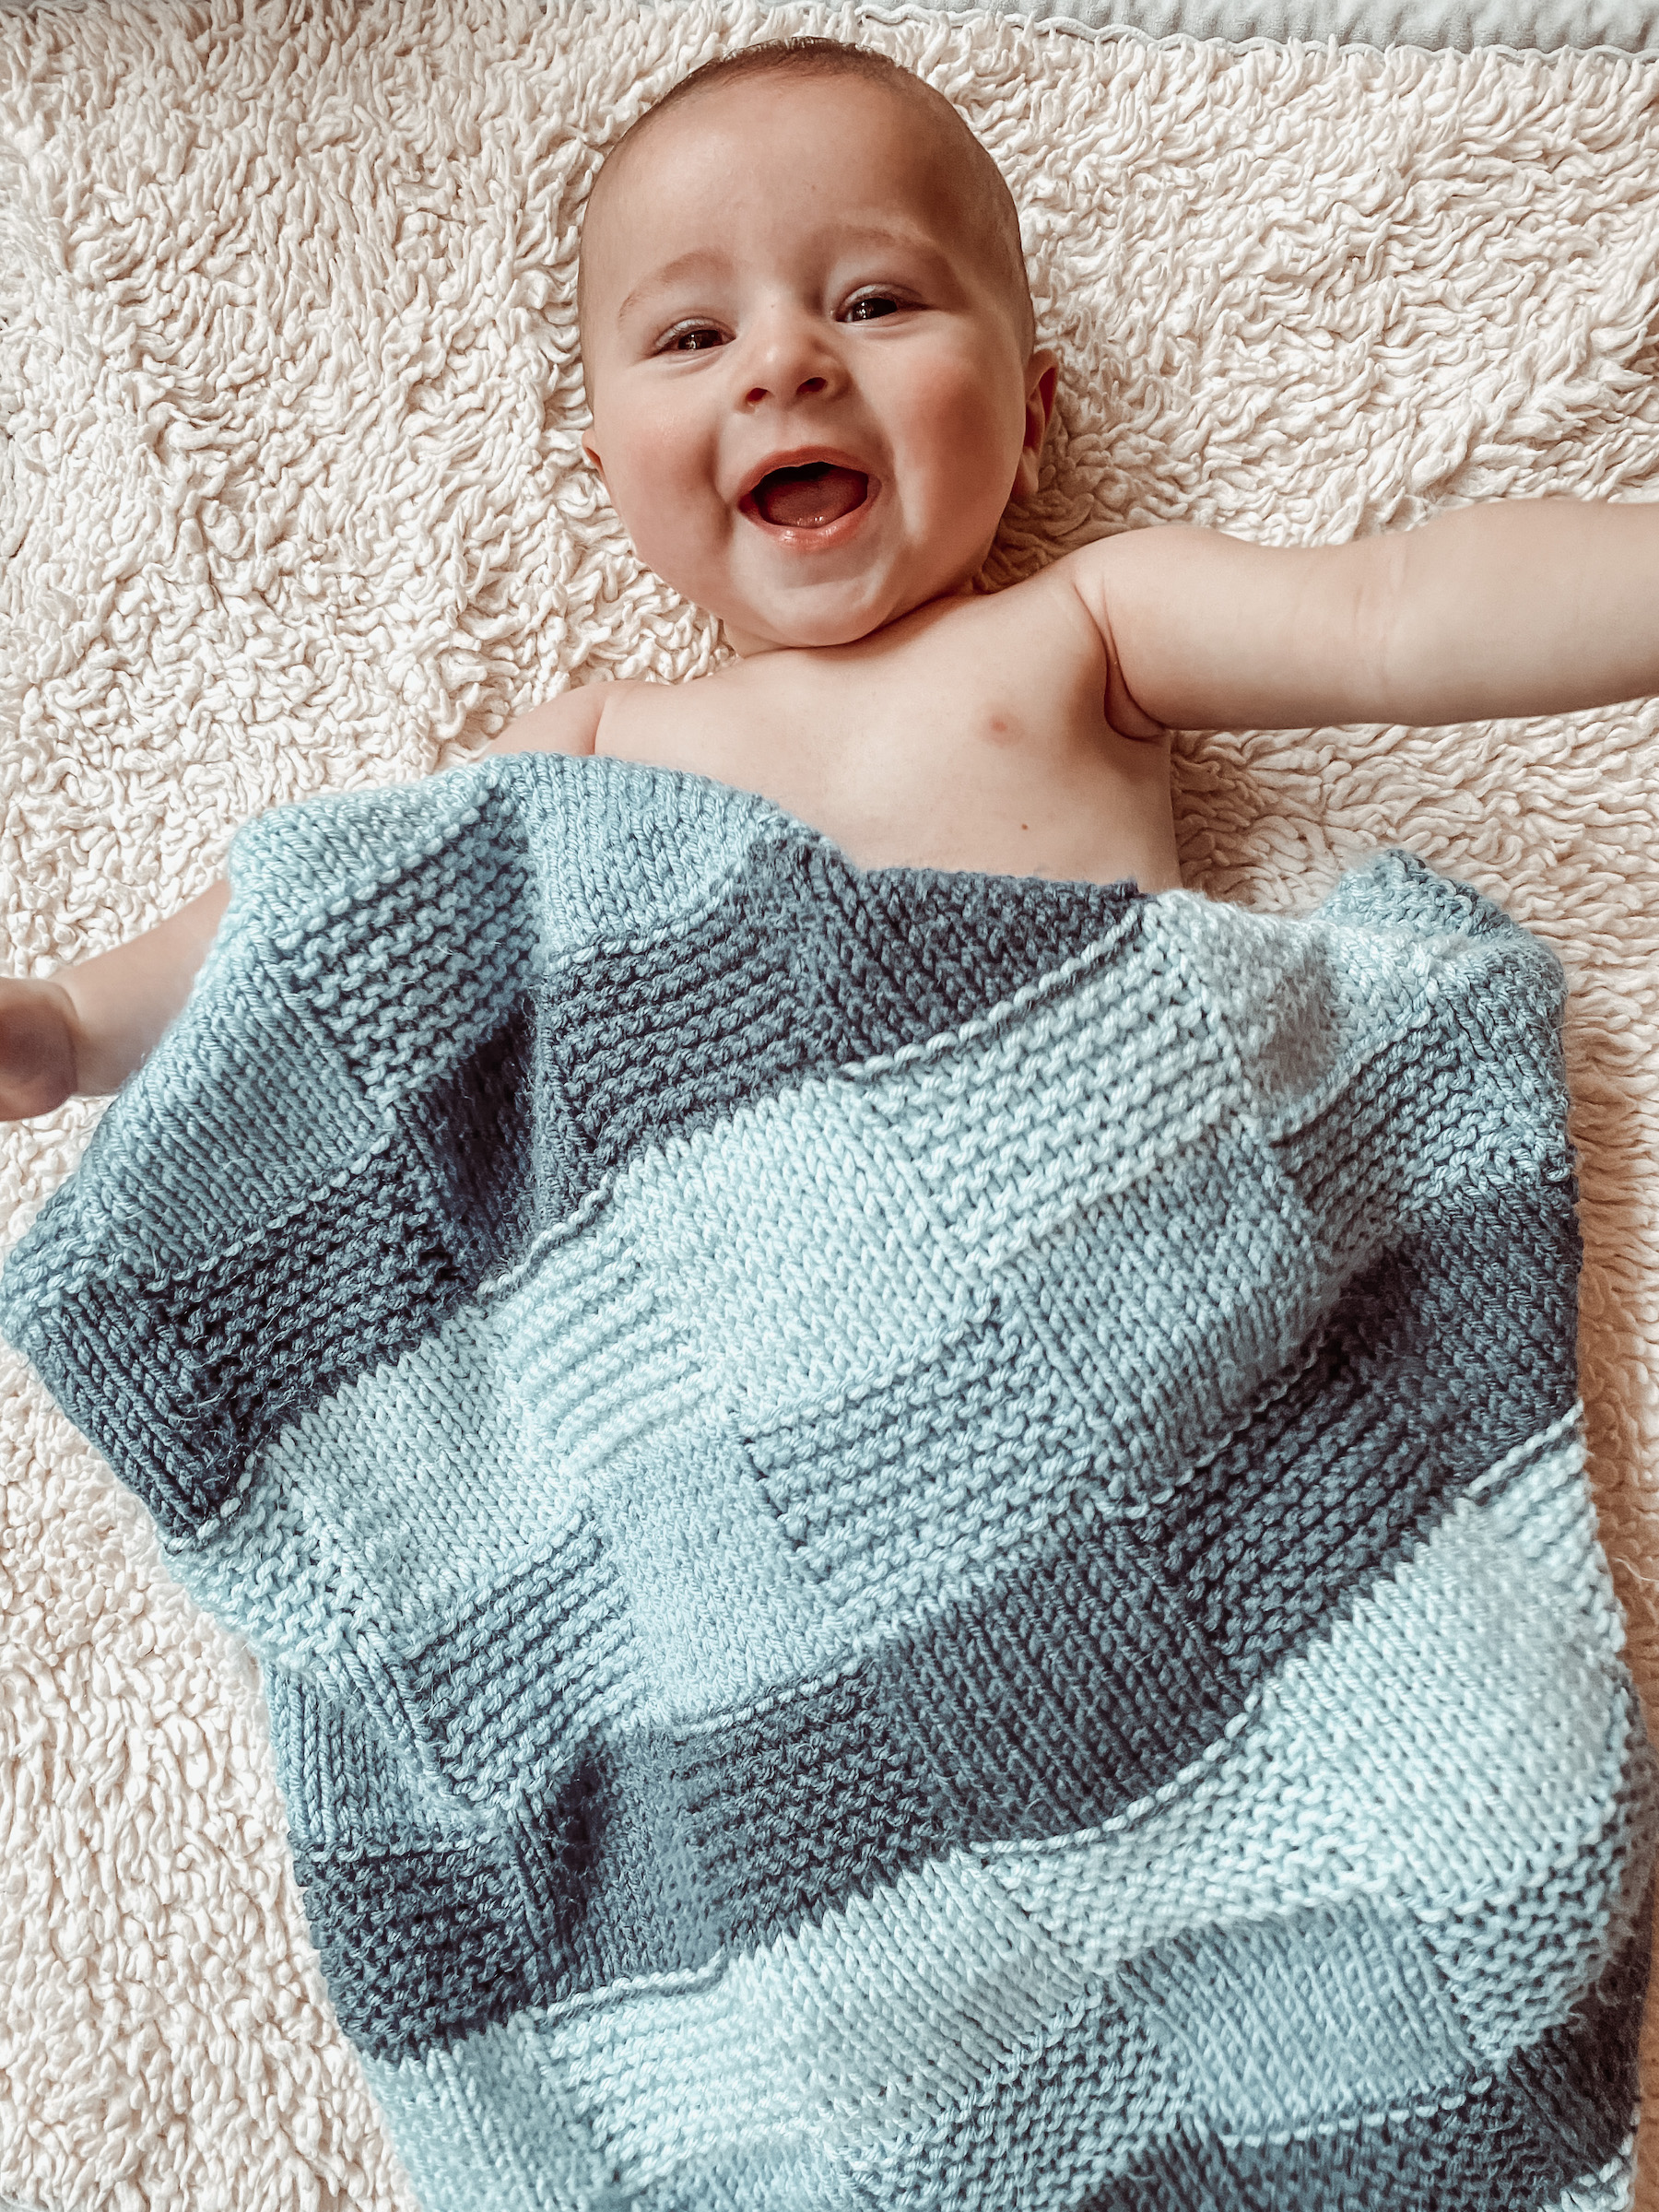 Knitting Three Wishes Baby Blanket | candyloucreations